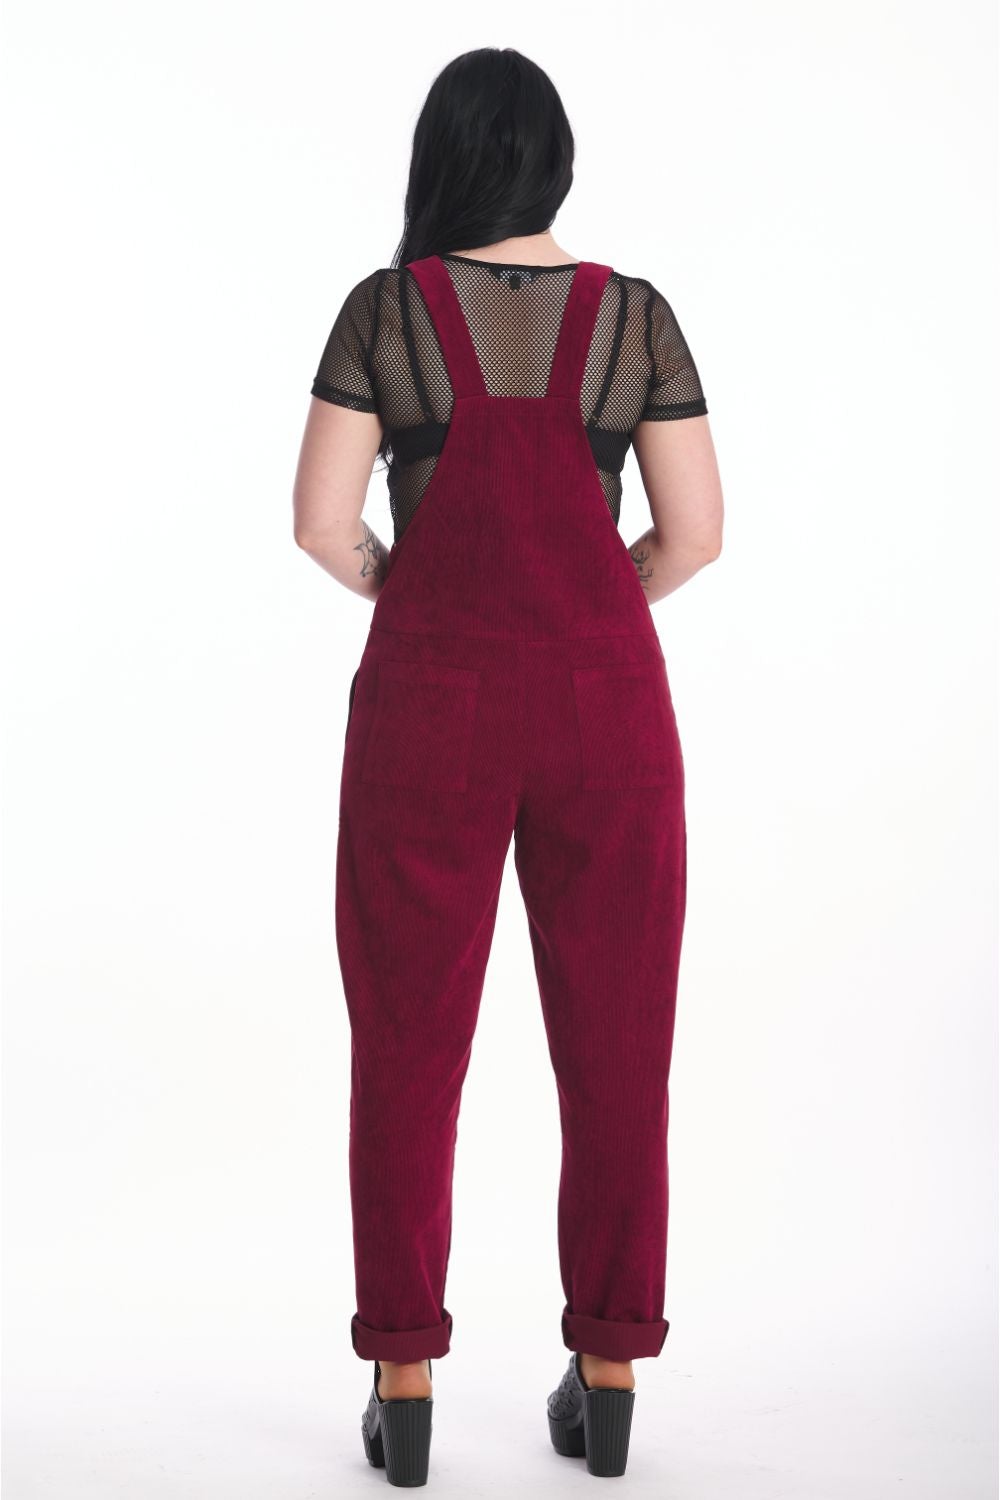 Back of alternative model in moss burgundy dungarees with black mesh crop top underneath. 